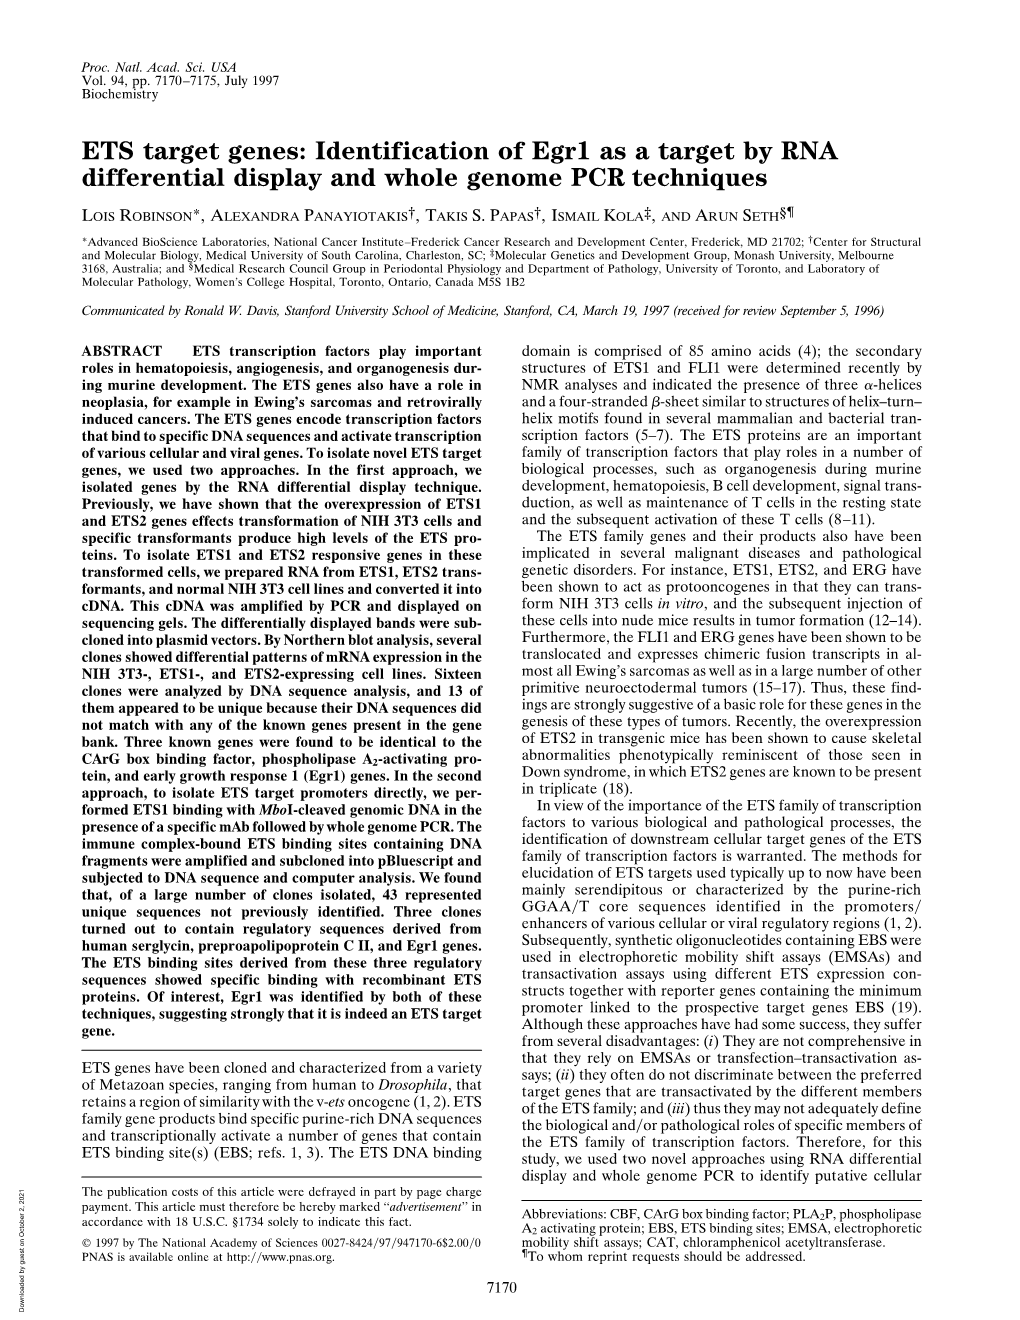 ETS Target Genes: Identification of Egr1 As a Target by RNA Differential Display and Whole Genome PCR Techniques